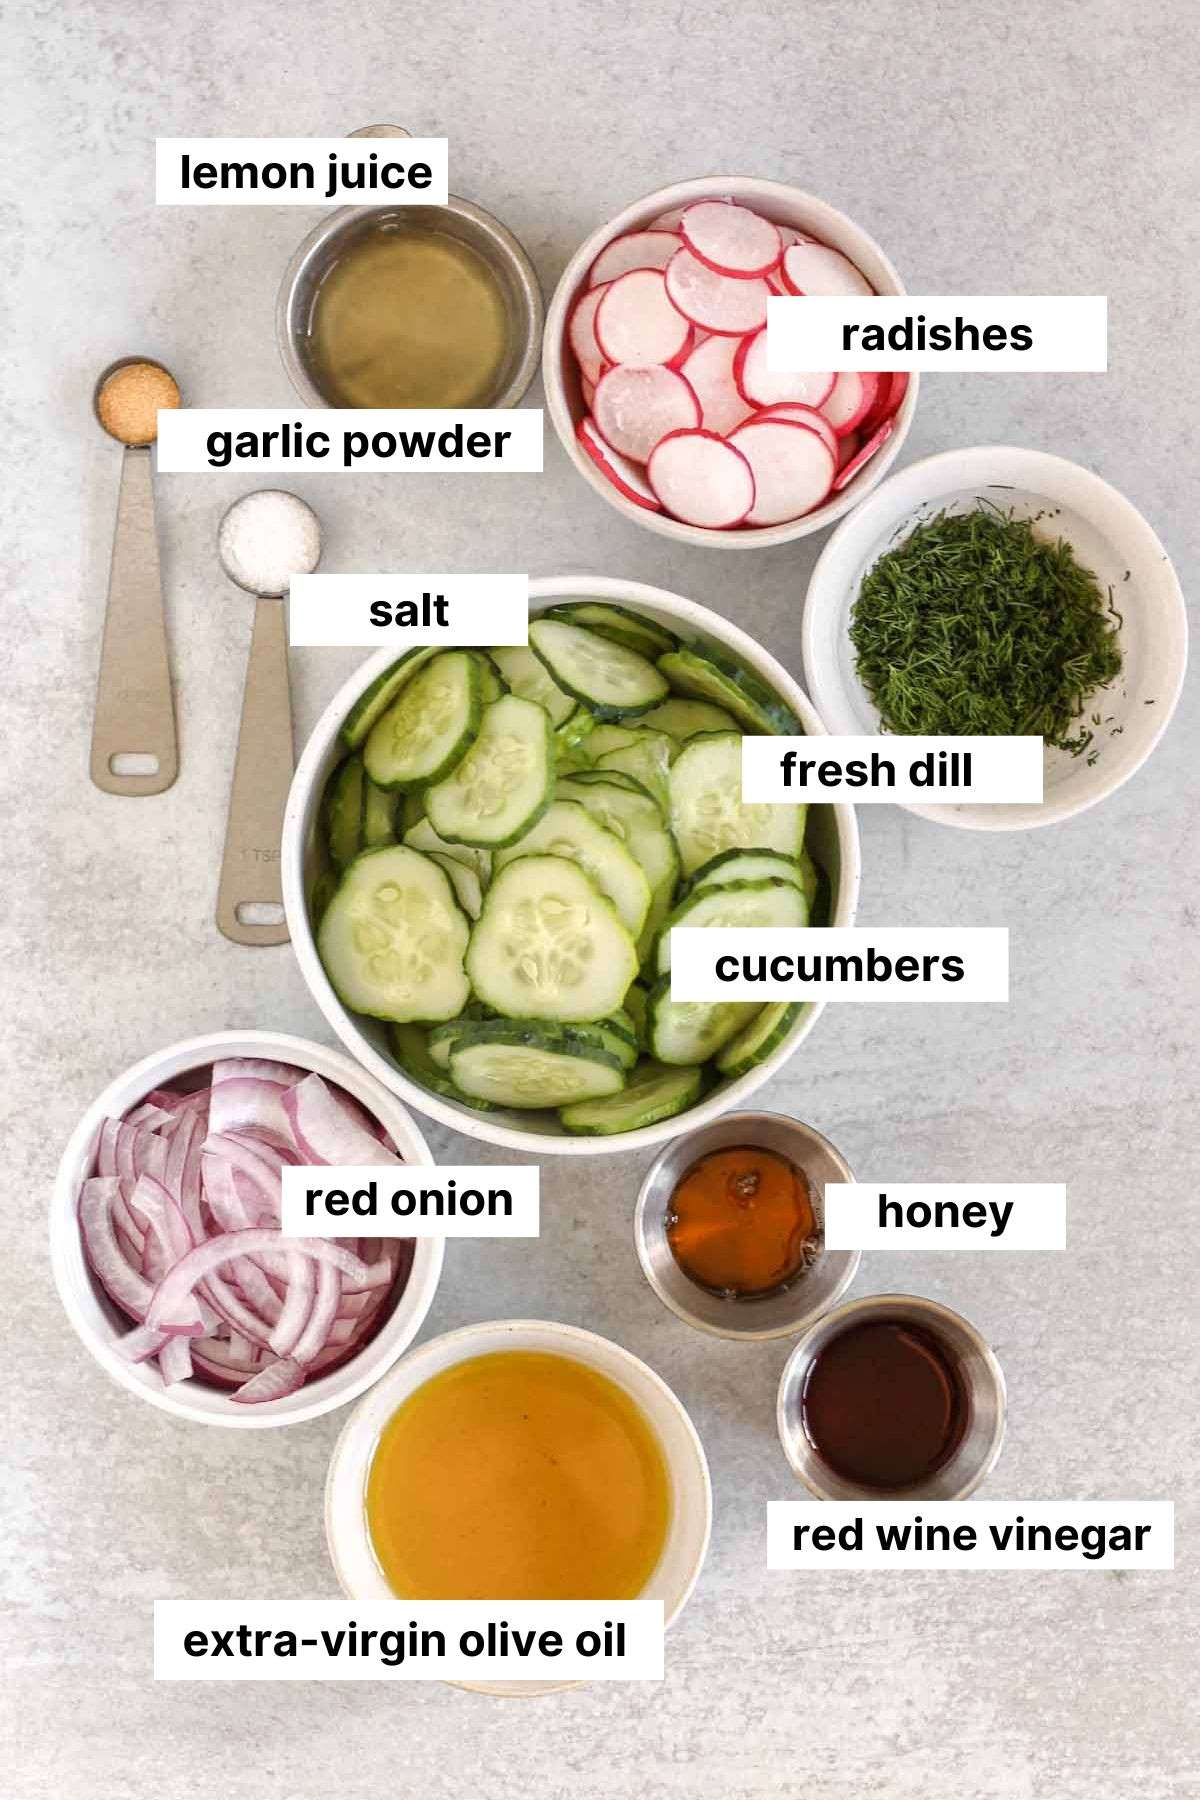 Labeled ingredients for cucumber, radish, and dill salad.